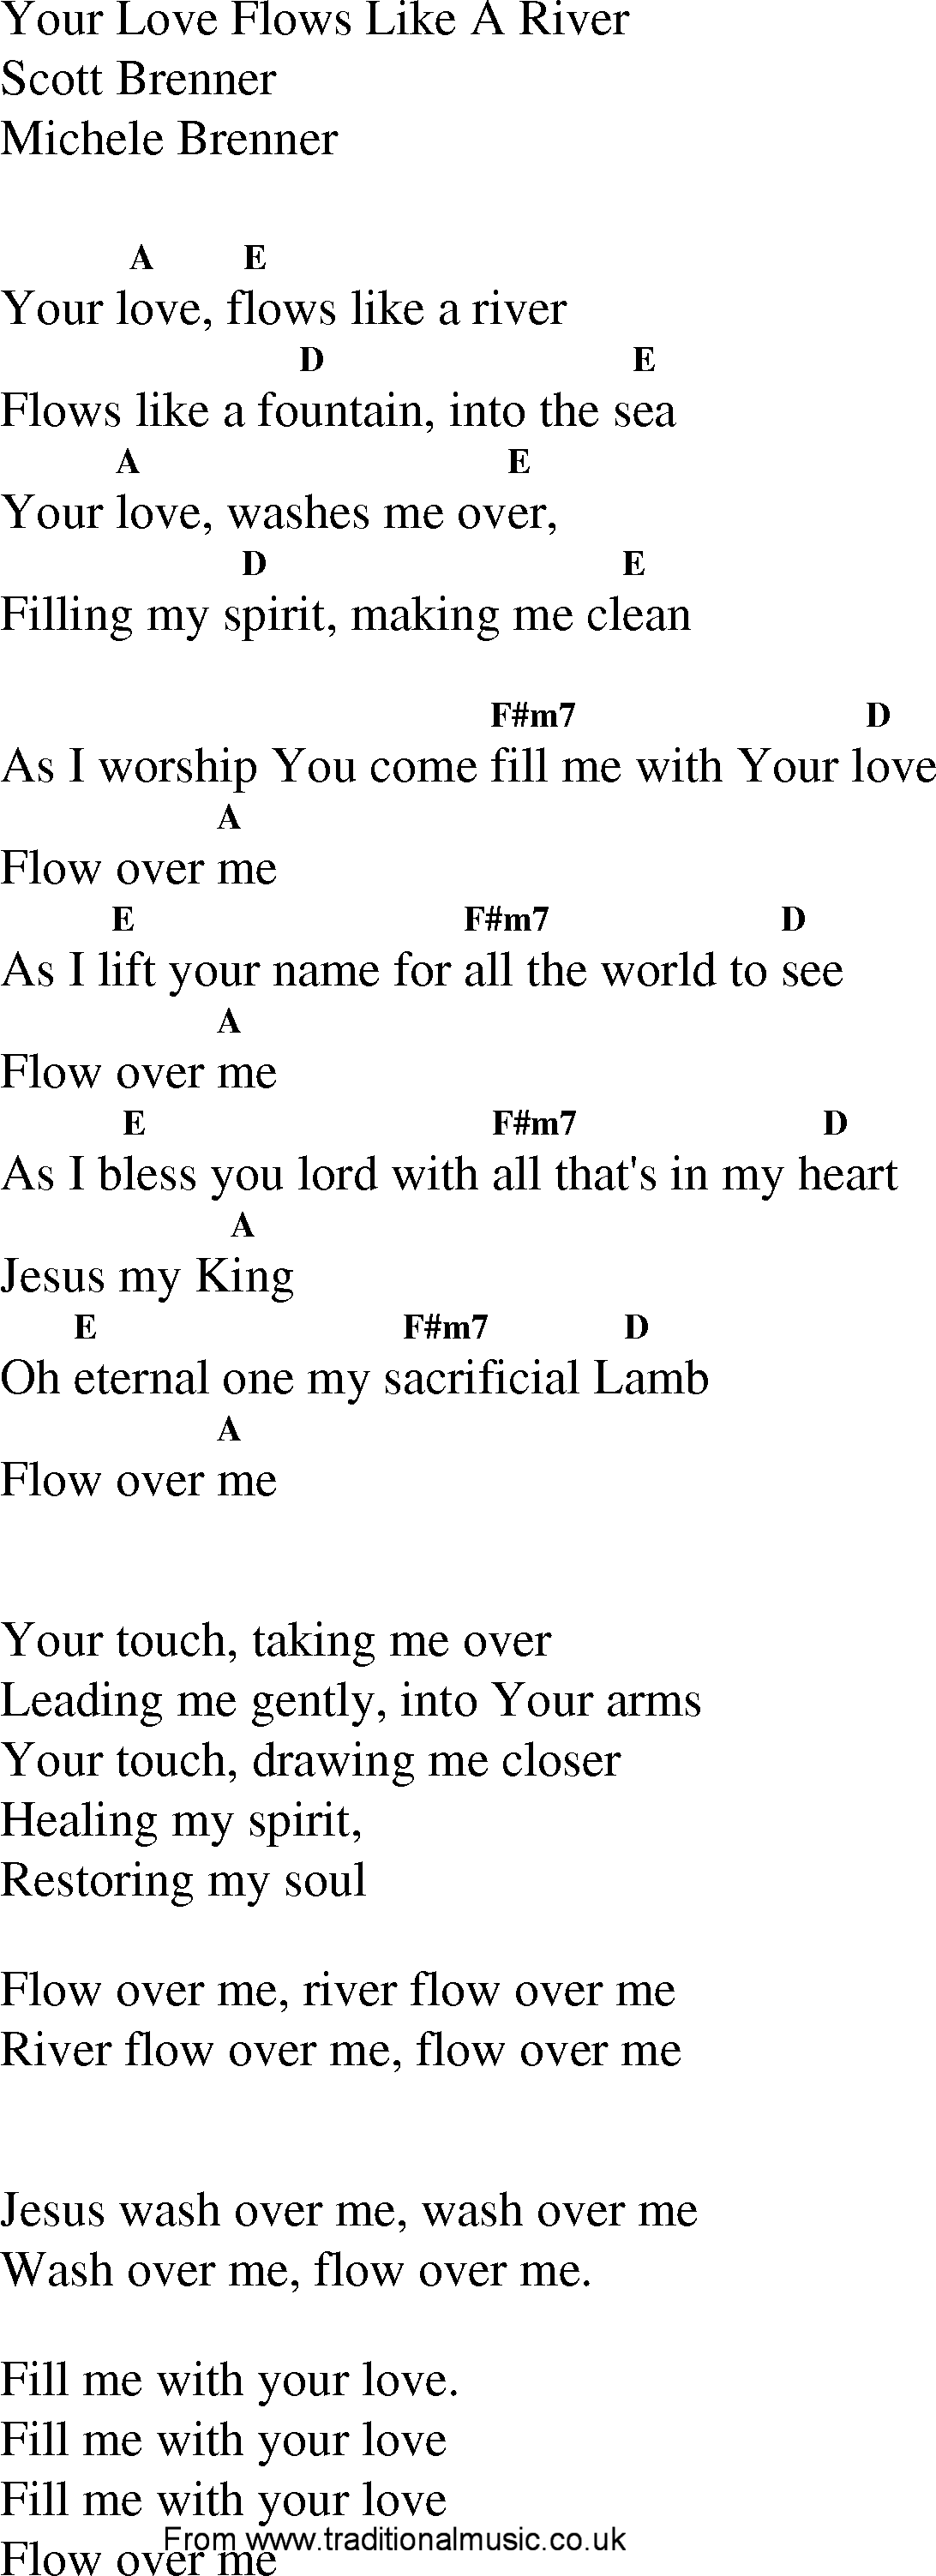 Gospel Song: your_love_flows_like_a_river, lyrics and chords.